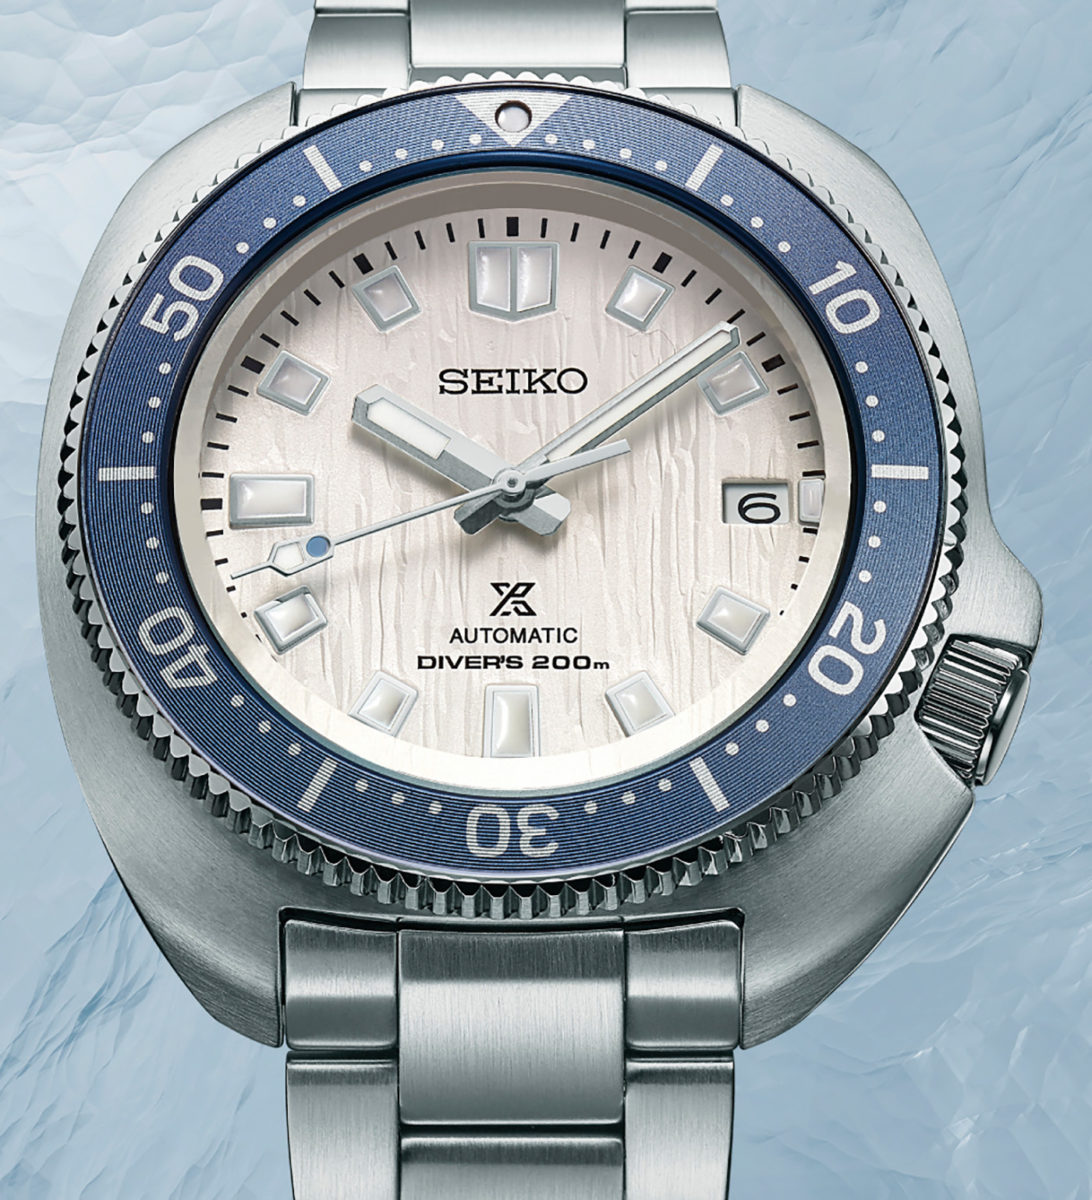 Seiko 'Save The Ocean' Dive Watches Look Good For A Good Cause